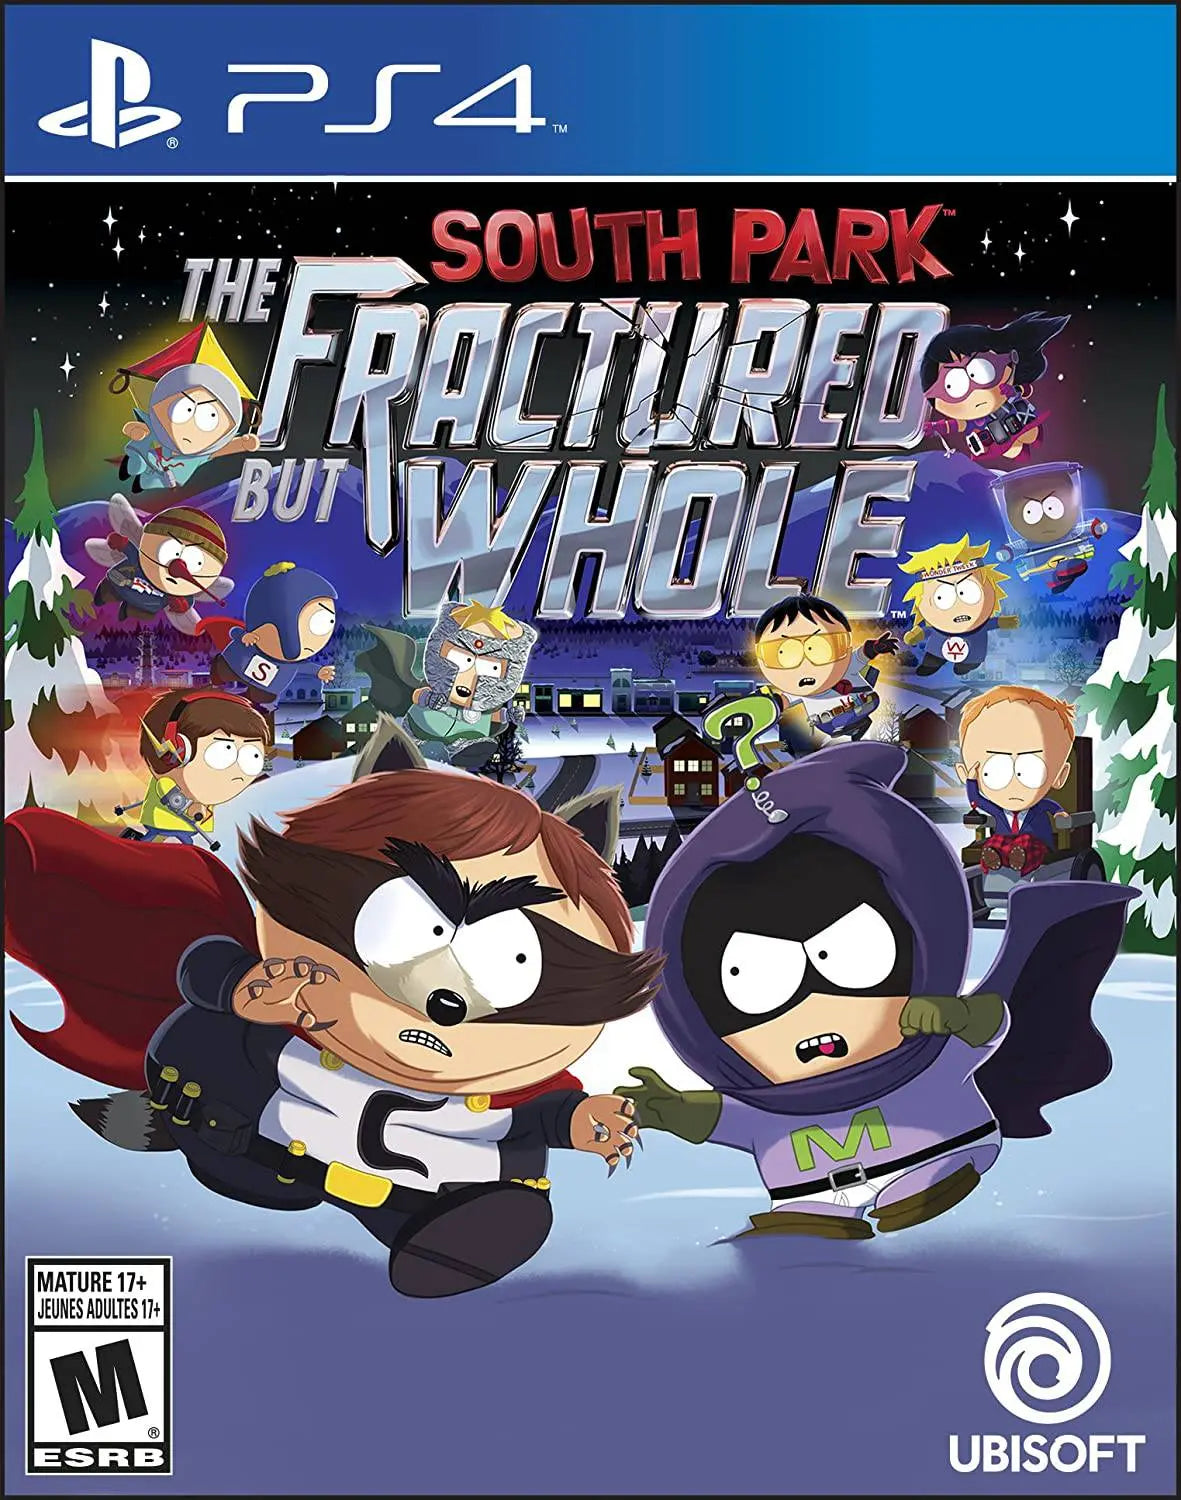 South Park: The Fractured But Whole - Trilingual - PlayStation 4 - Standard Edition King Gaming